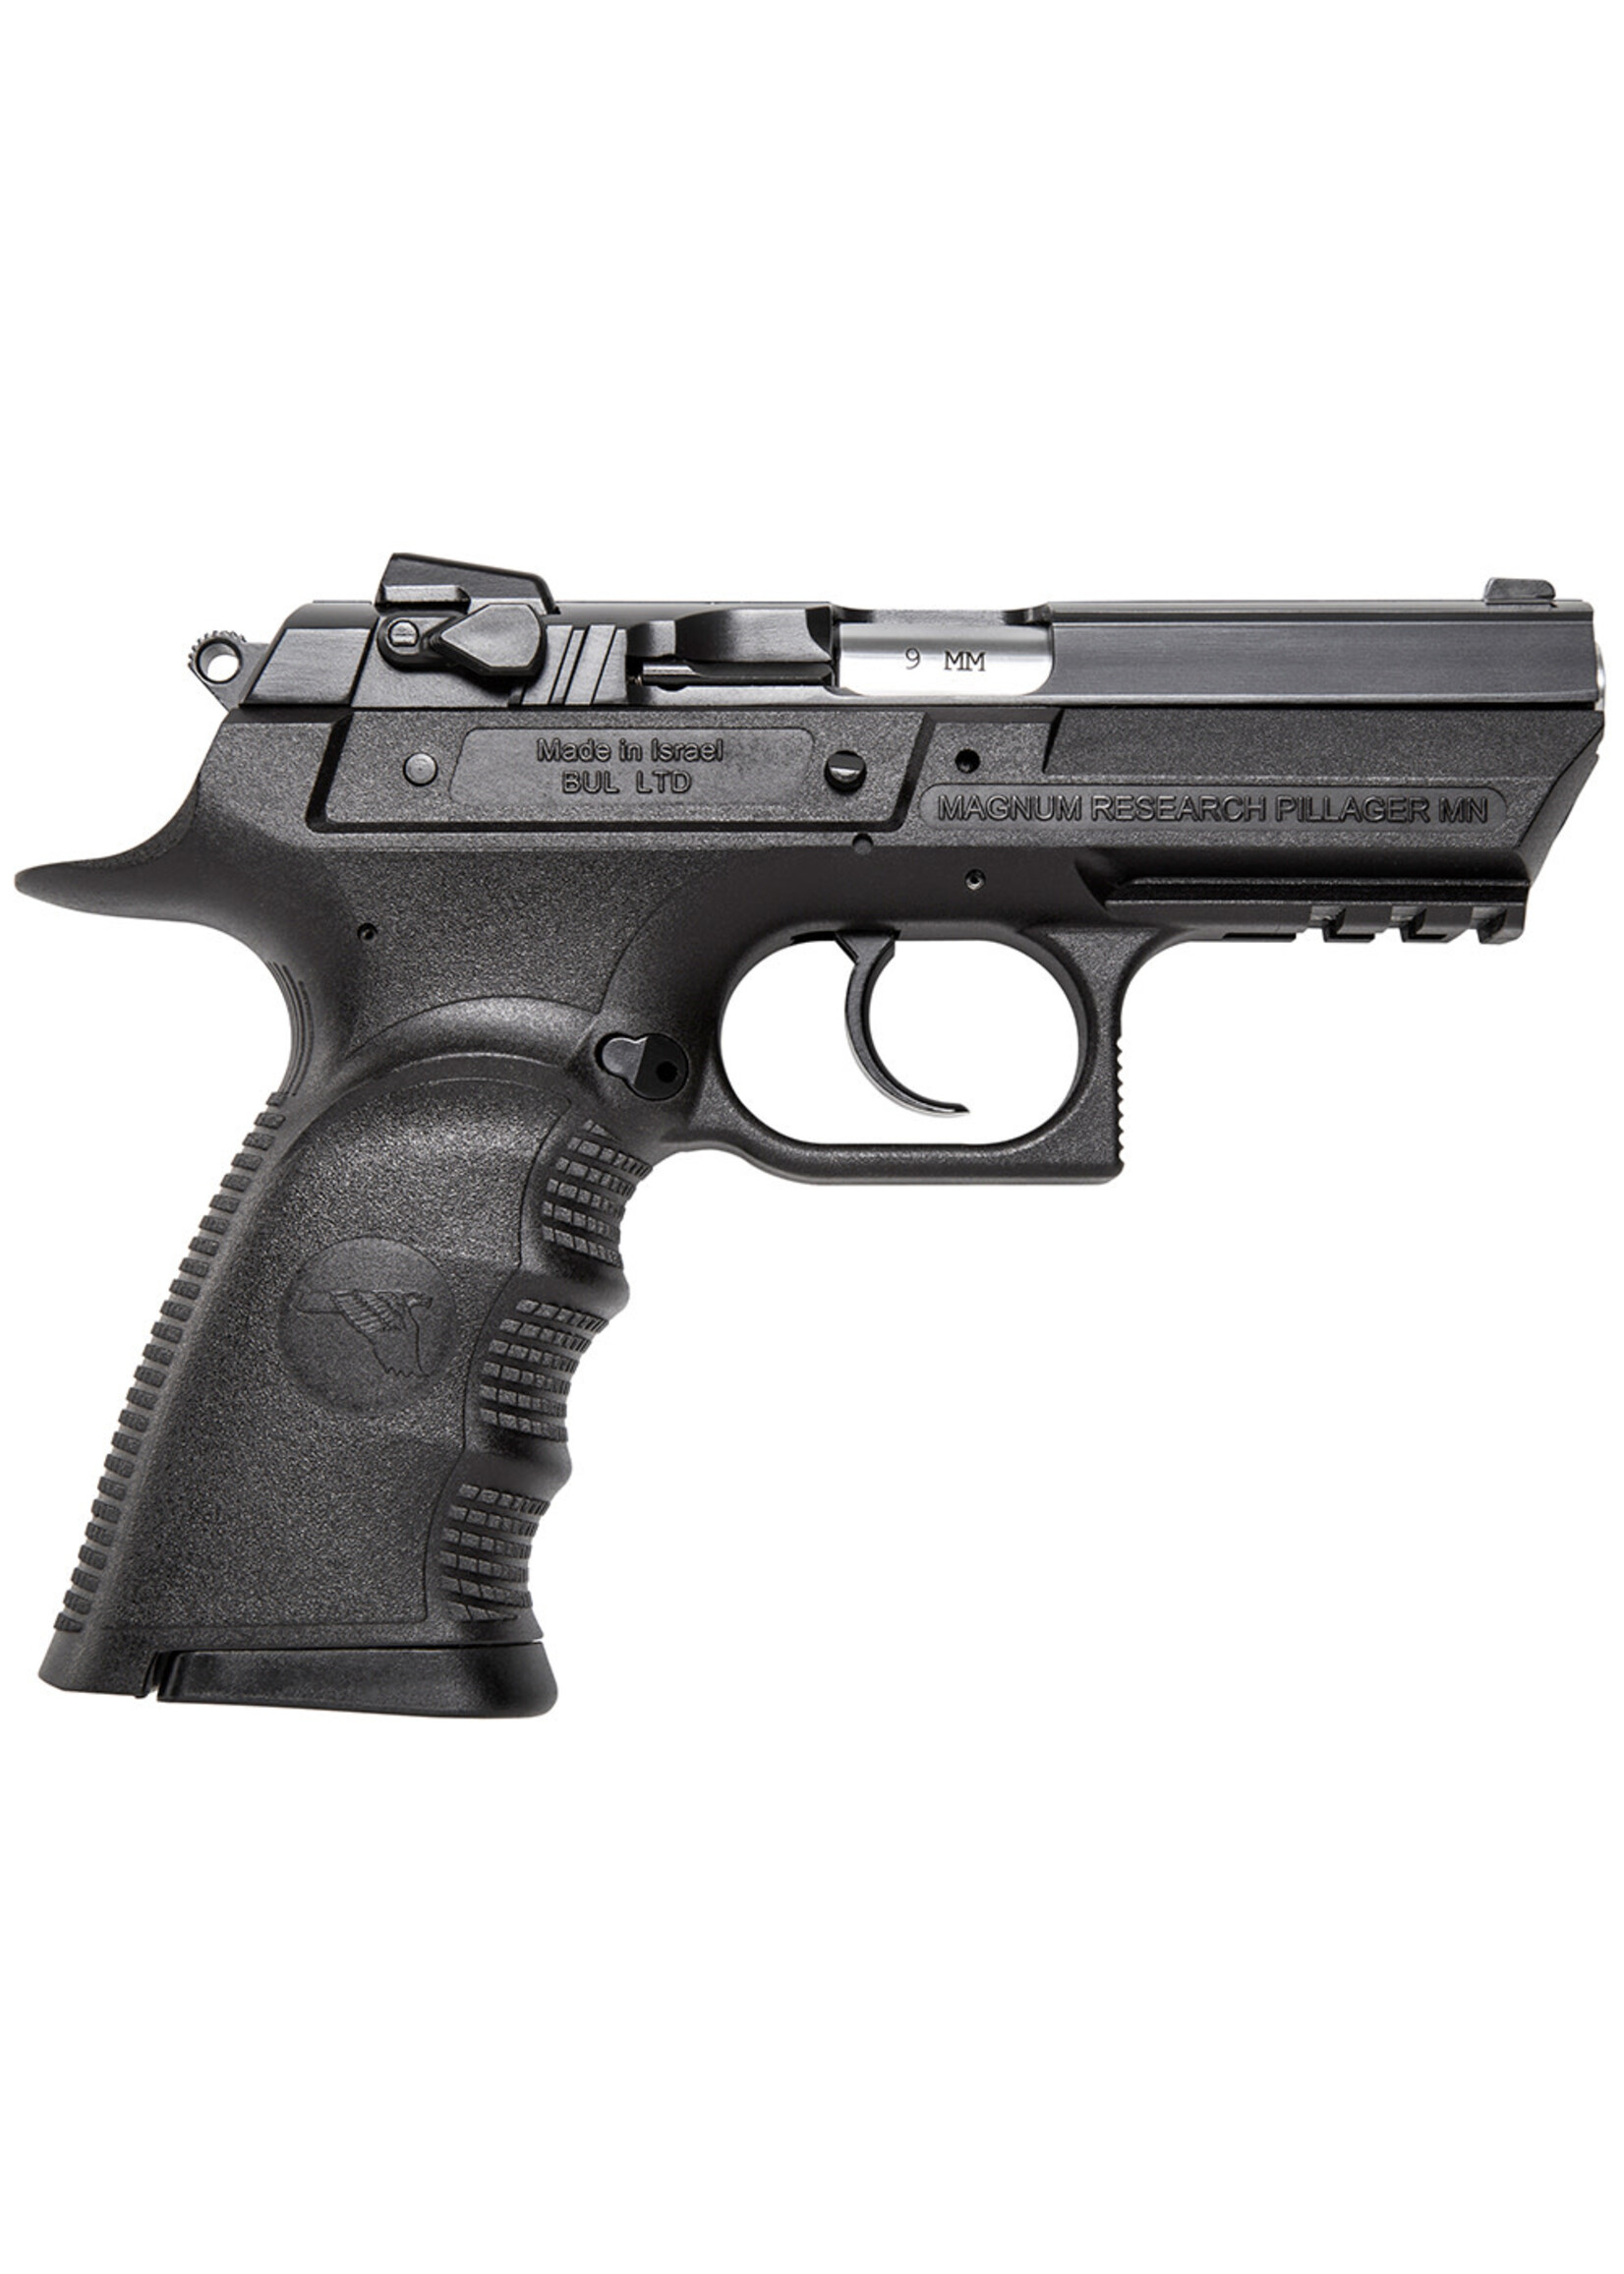 Magnum Research Magnum Research BE99153RSL Baby Eagle III Semi-Compact 9mm Luger Caliber with 3.85" Barrel, 15+1 Capacity, Black Finish Picatinny Rail/Beavertail Frame, Matte Black Oxide Carbon Steel Slide & Finger Grooved Polymer Grip